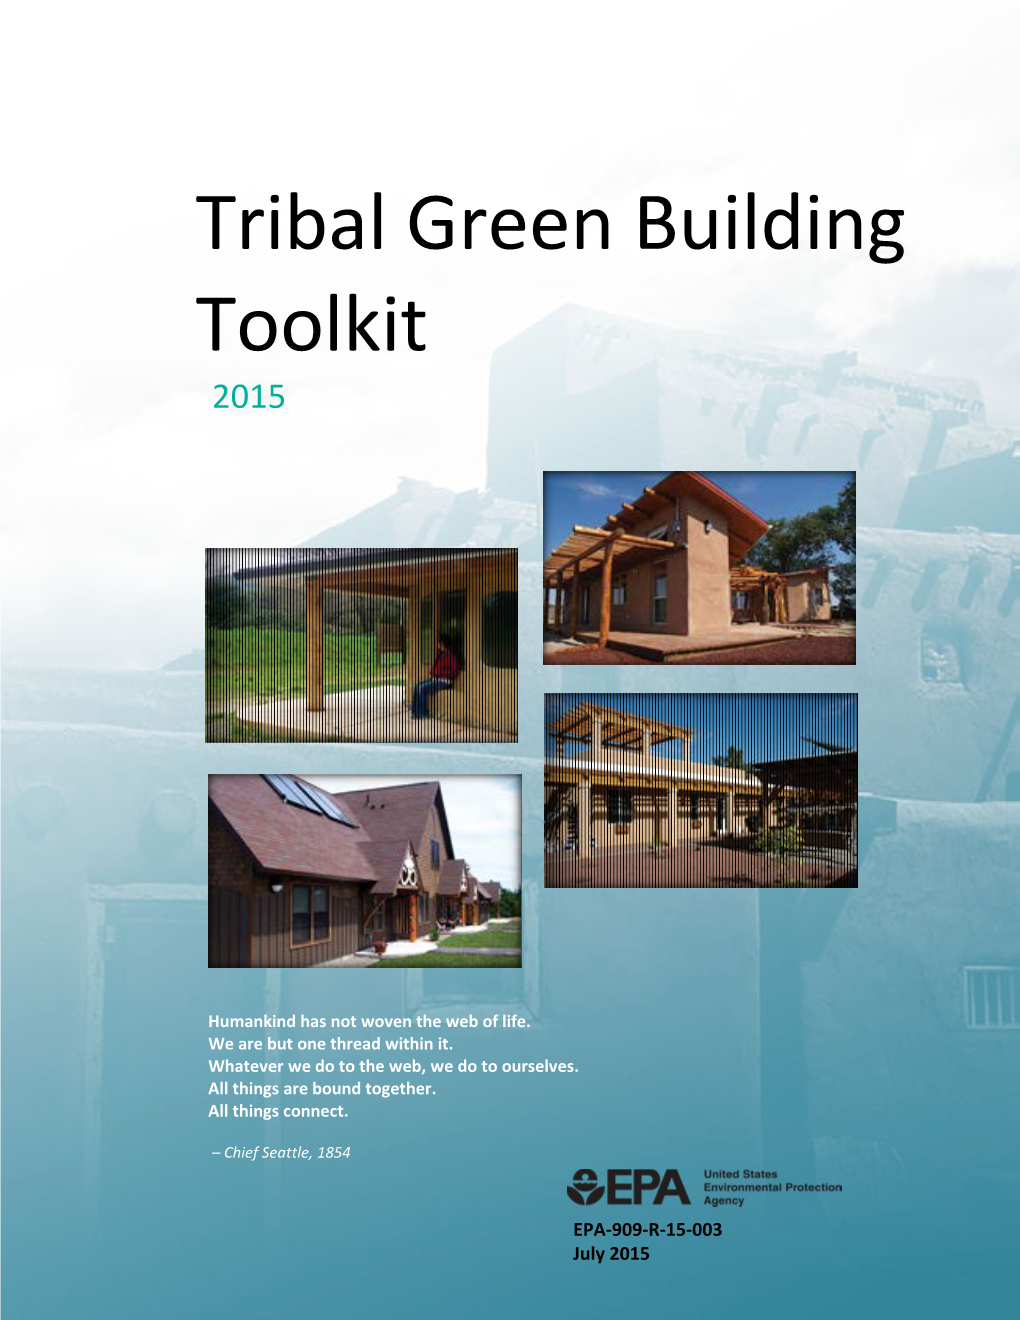 Tribal Green Building Toolkit 2015